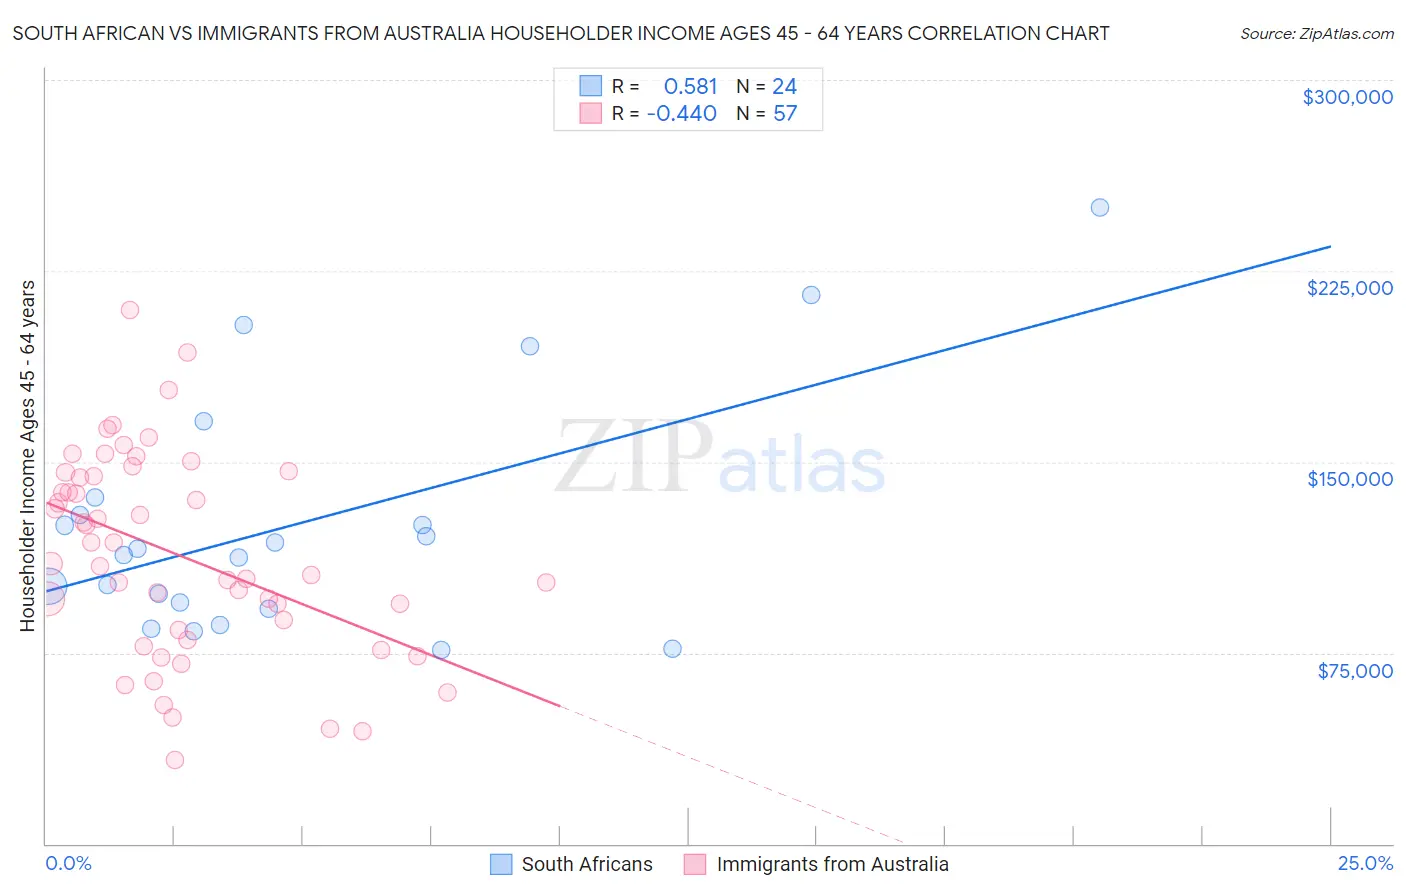 South African vs Immigrants from Australia Householder Income Ages 45 - 64 years